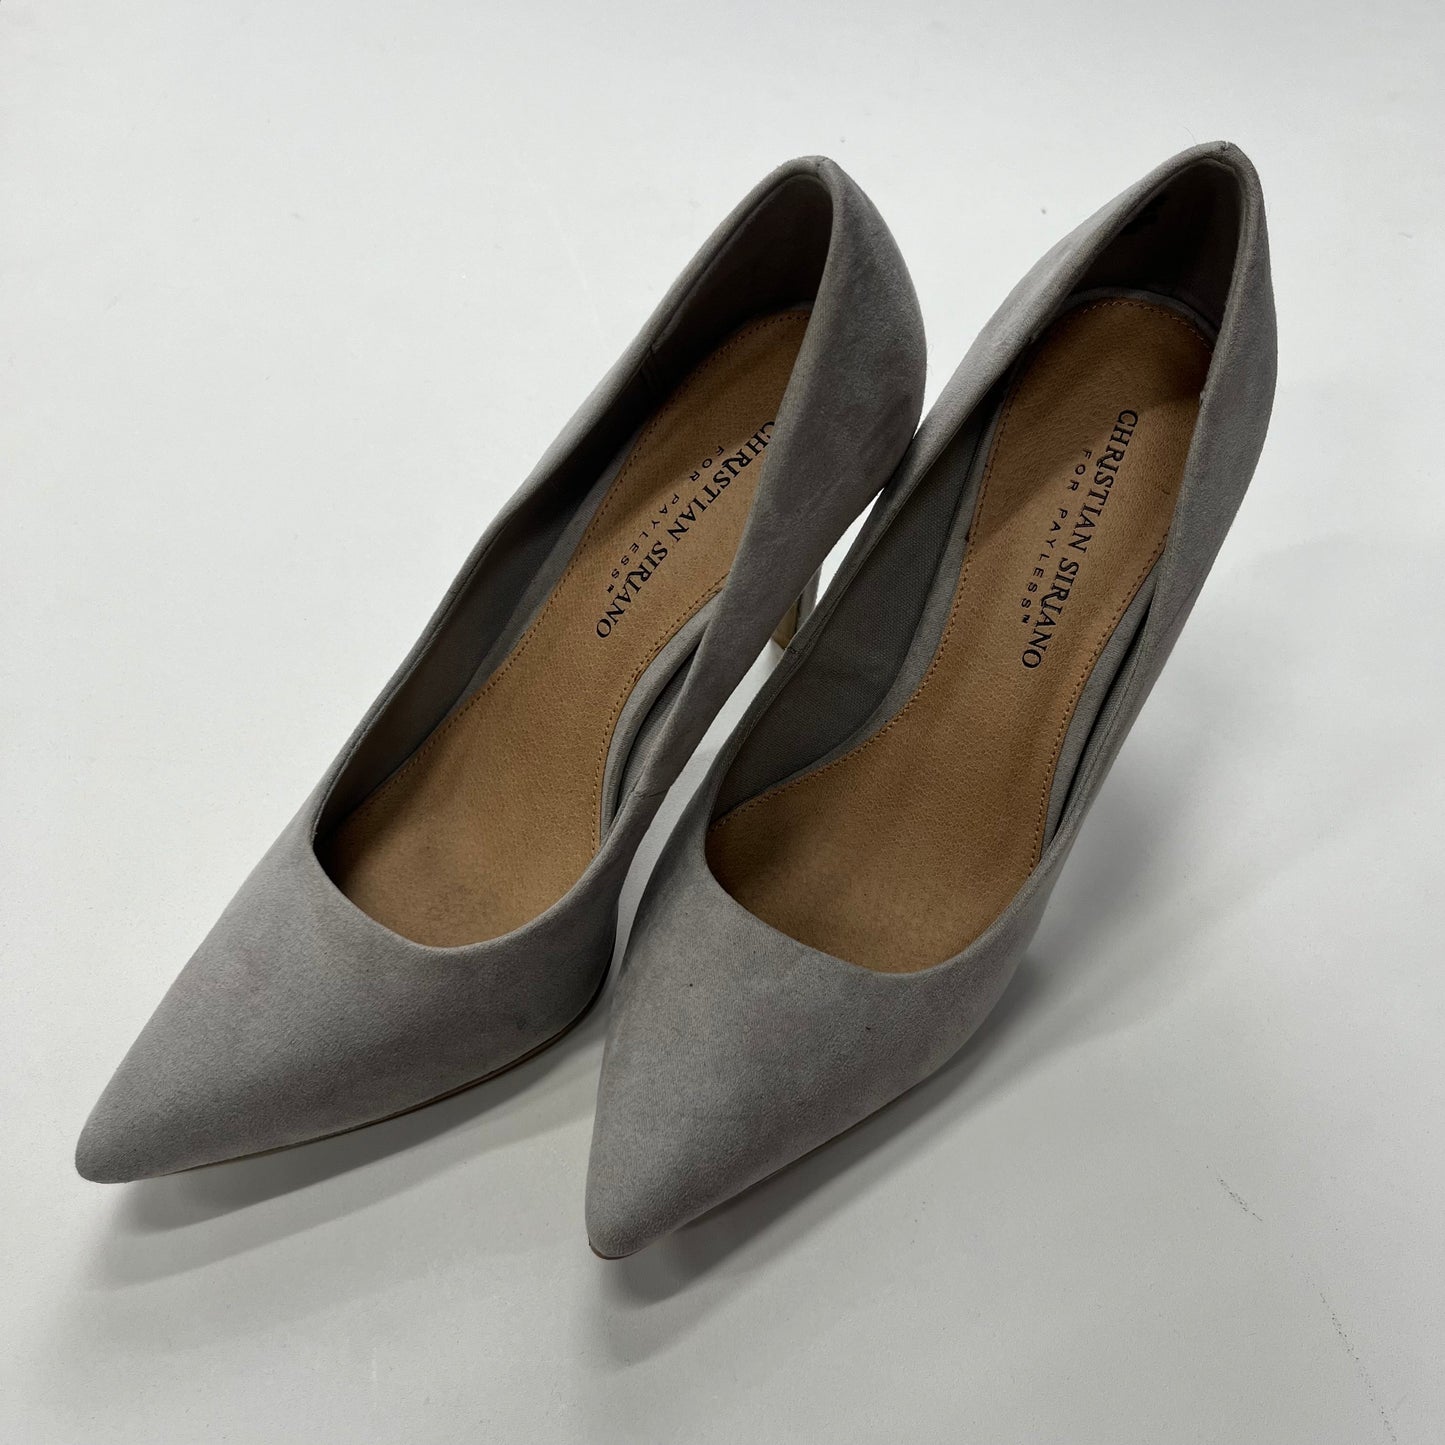 Shoes Heels D Orsay By Payless  Size: 8.5